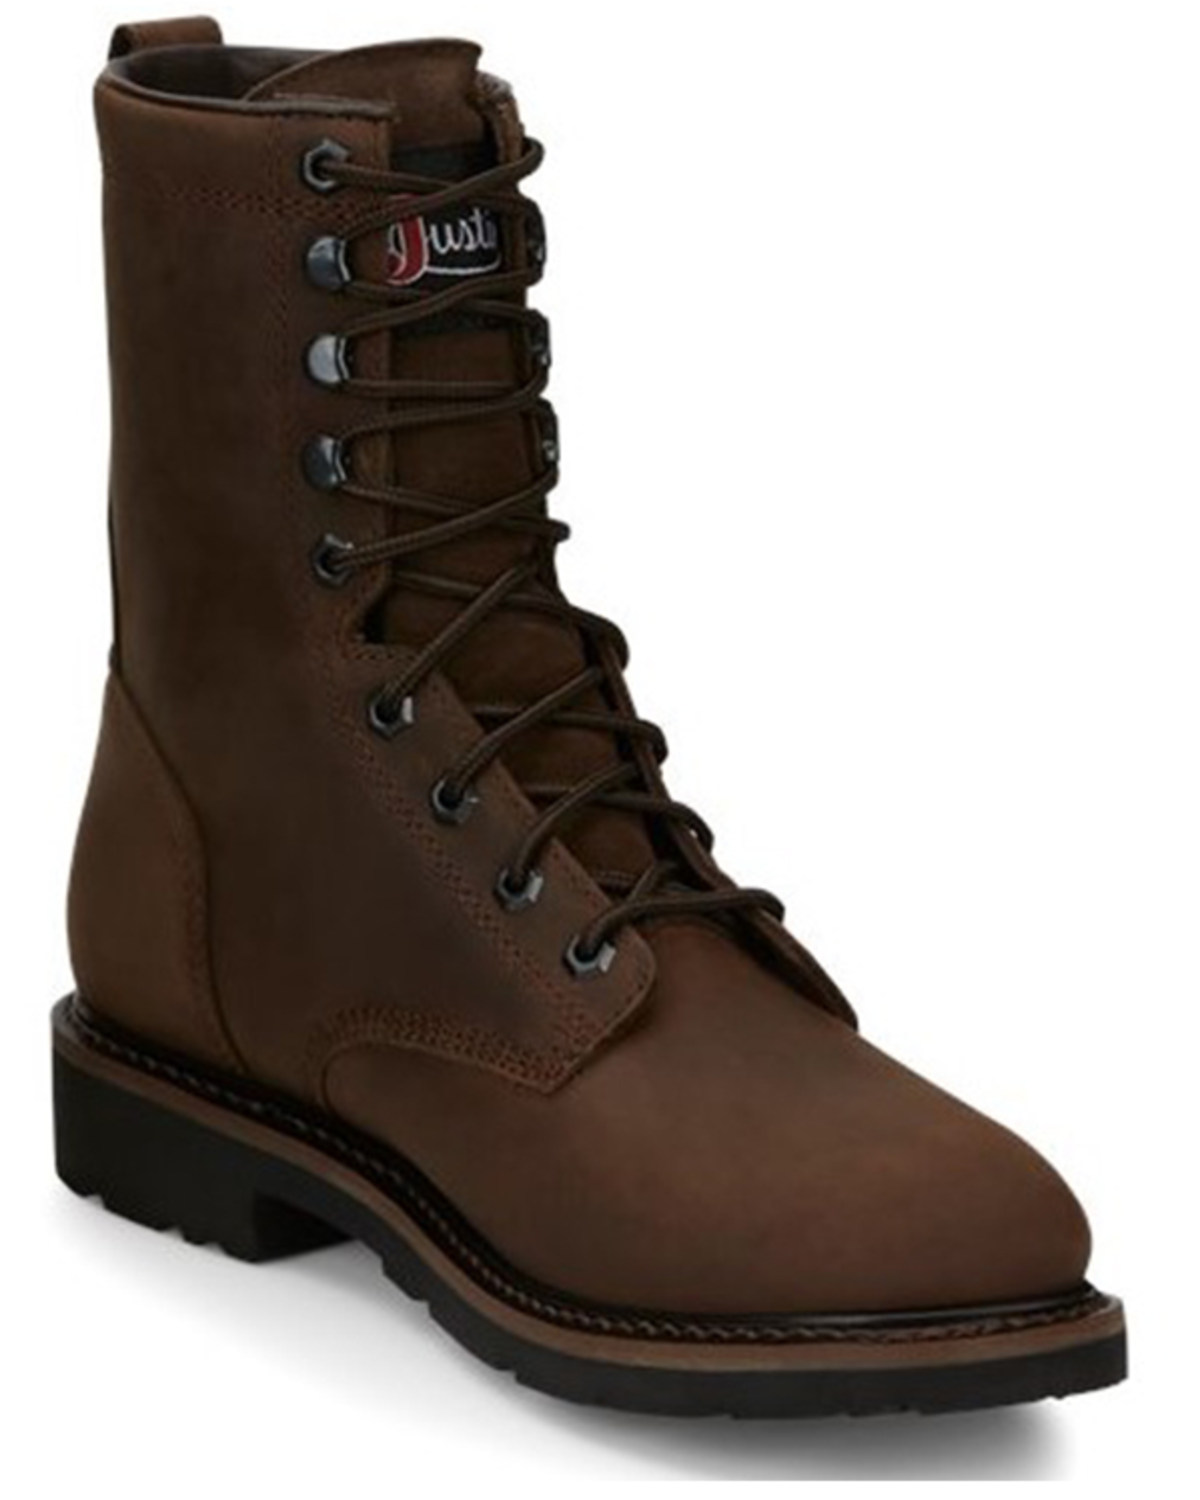 Justin Men's Drywall Work Boots - Soft Toe